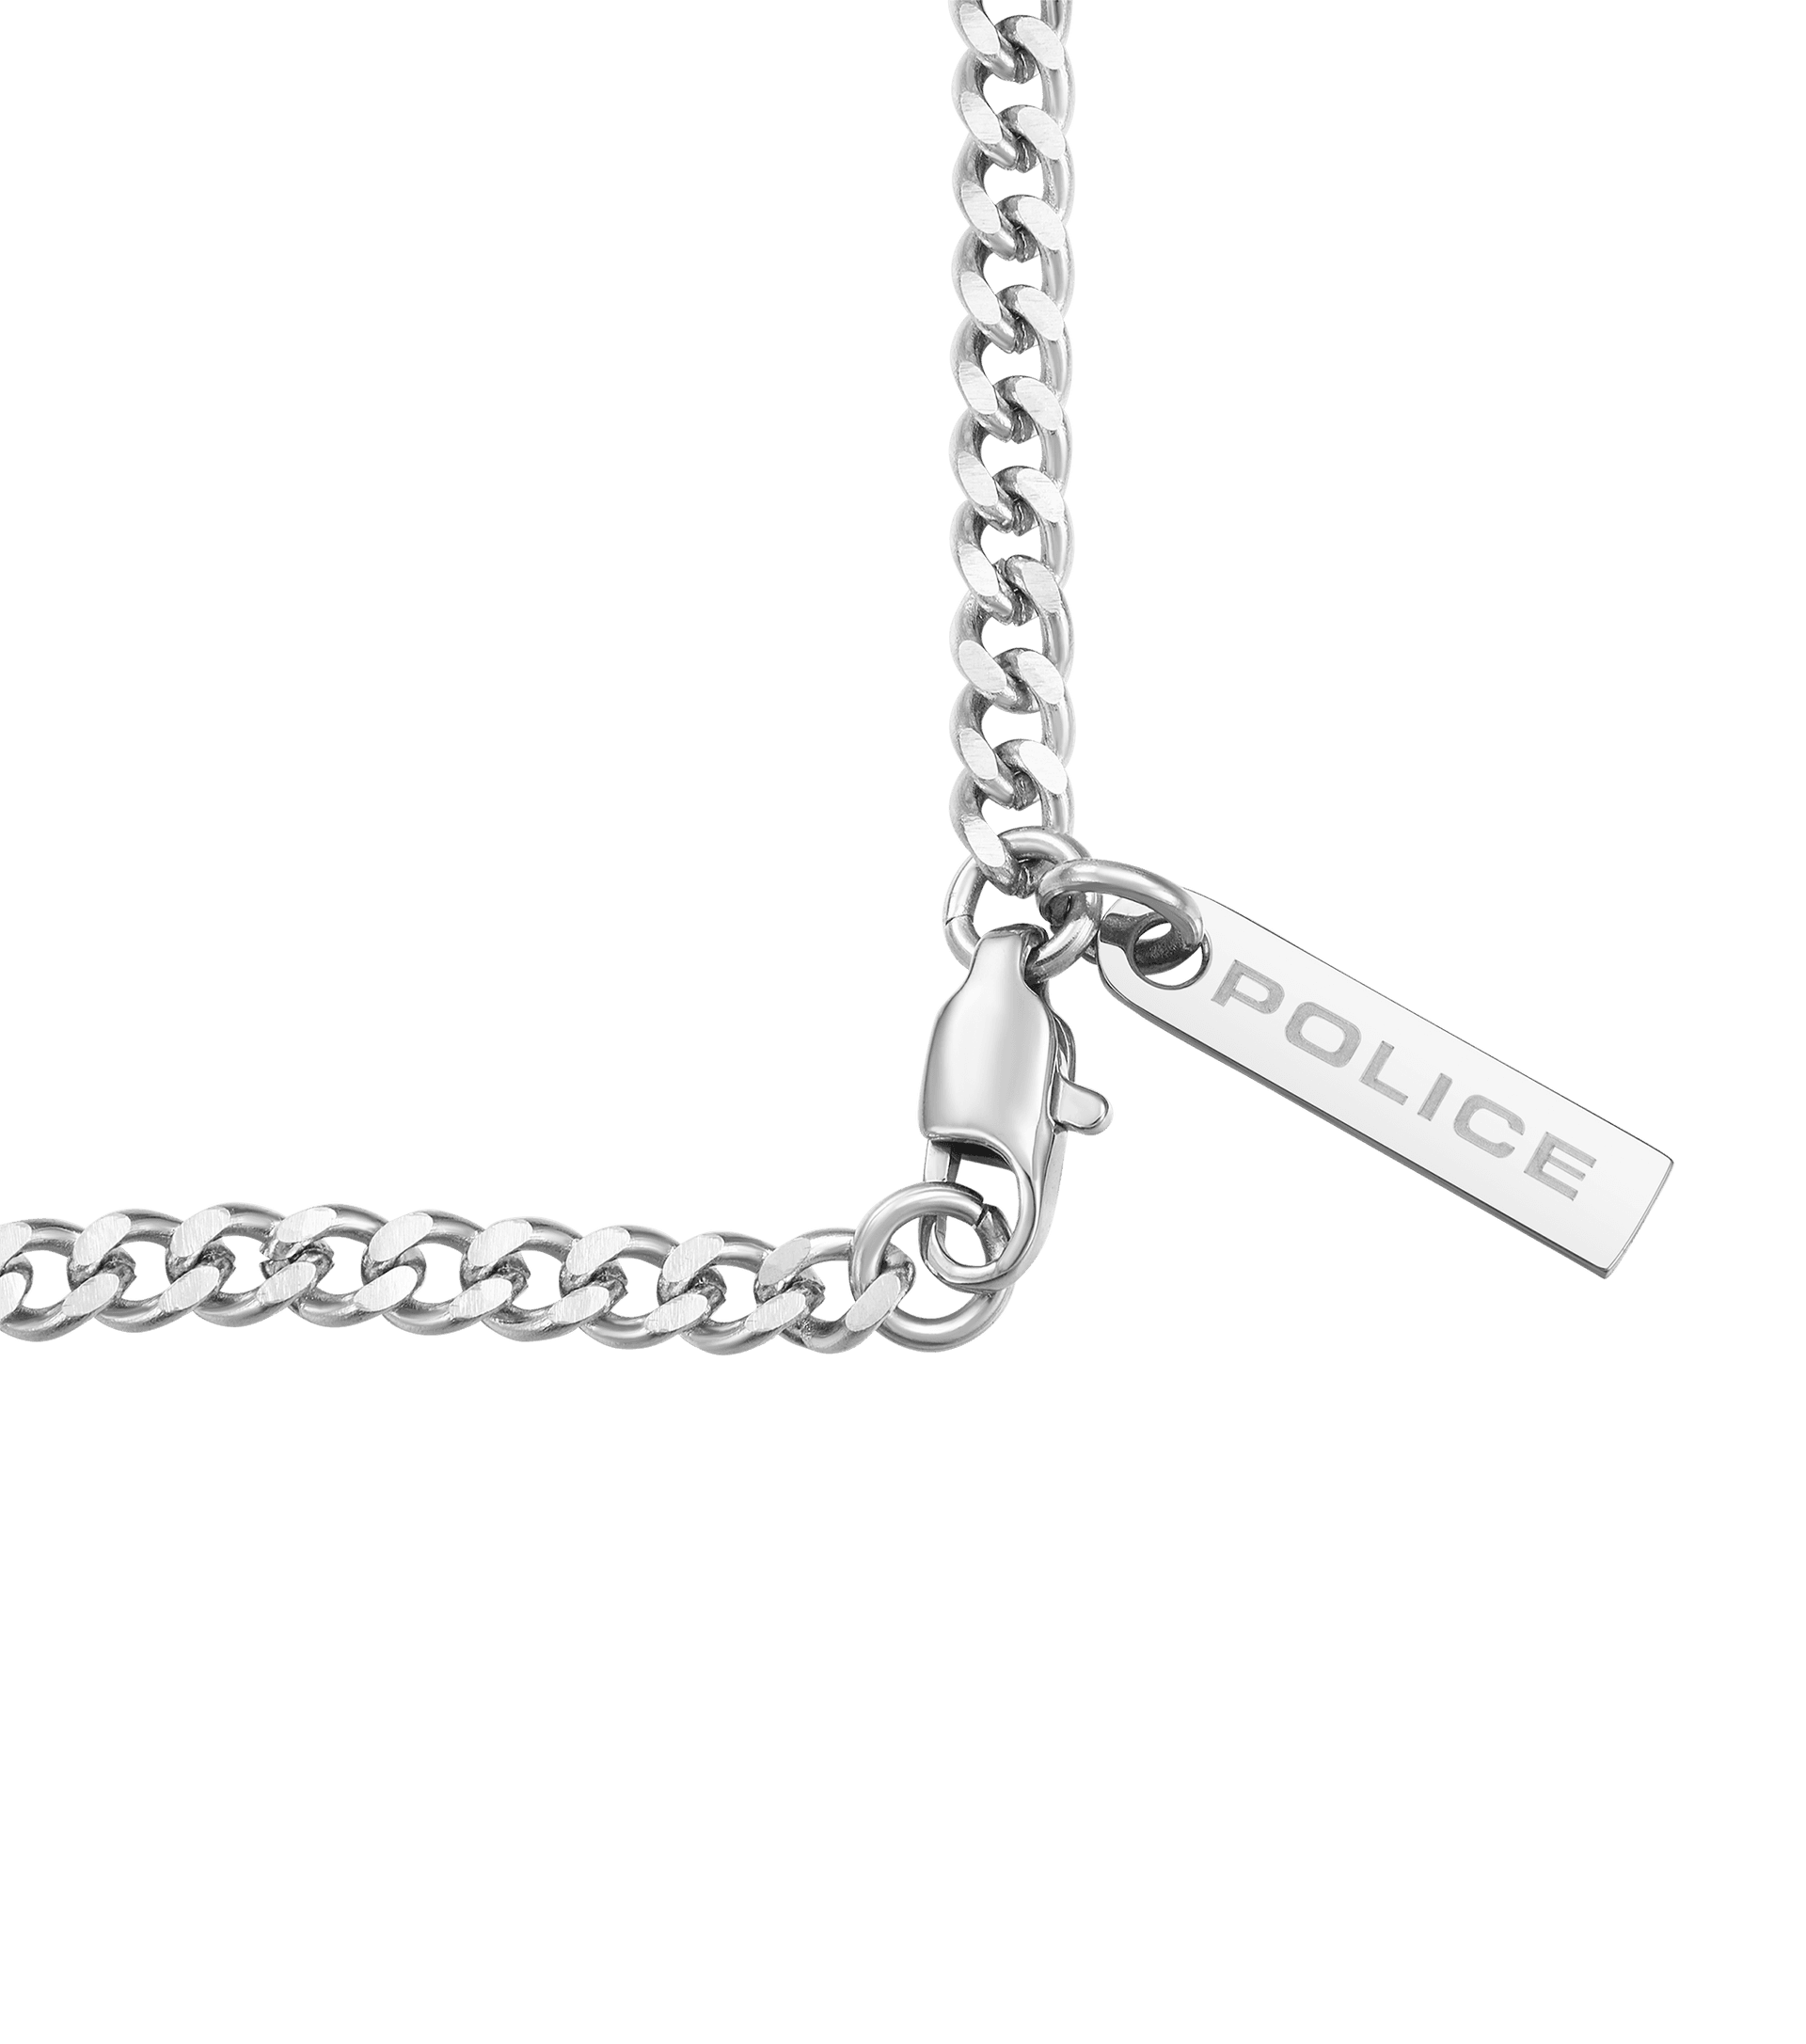 Police jewels - Tribal Edge Necklace By Police For Men PEAGN2120211 | Lange Ketten